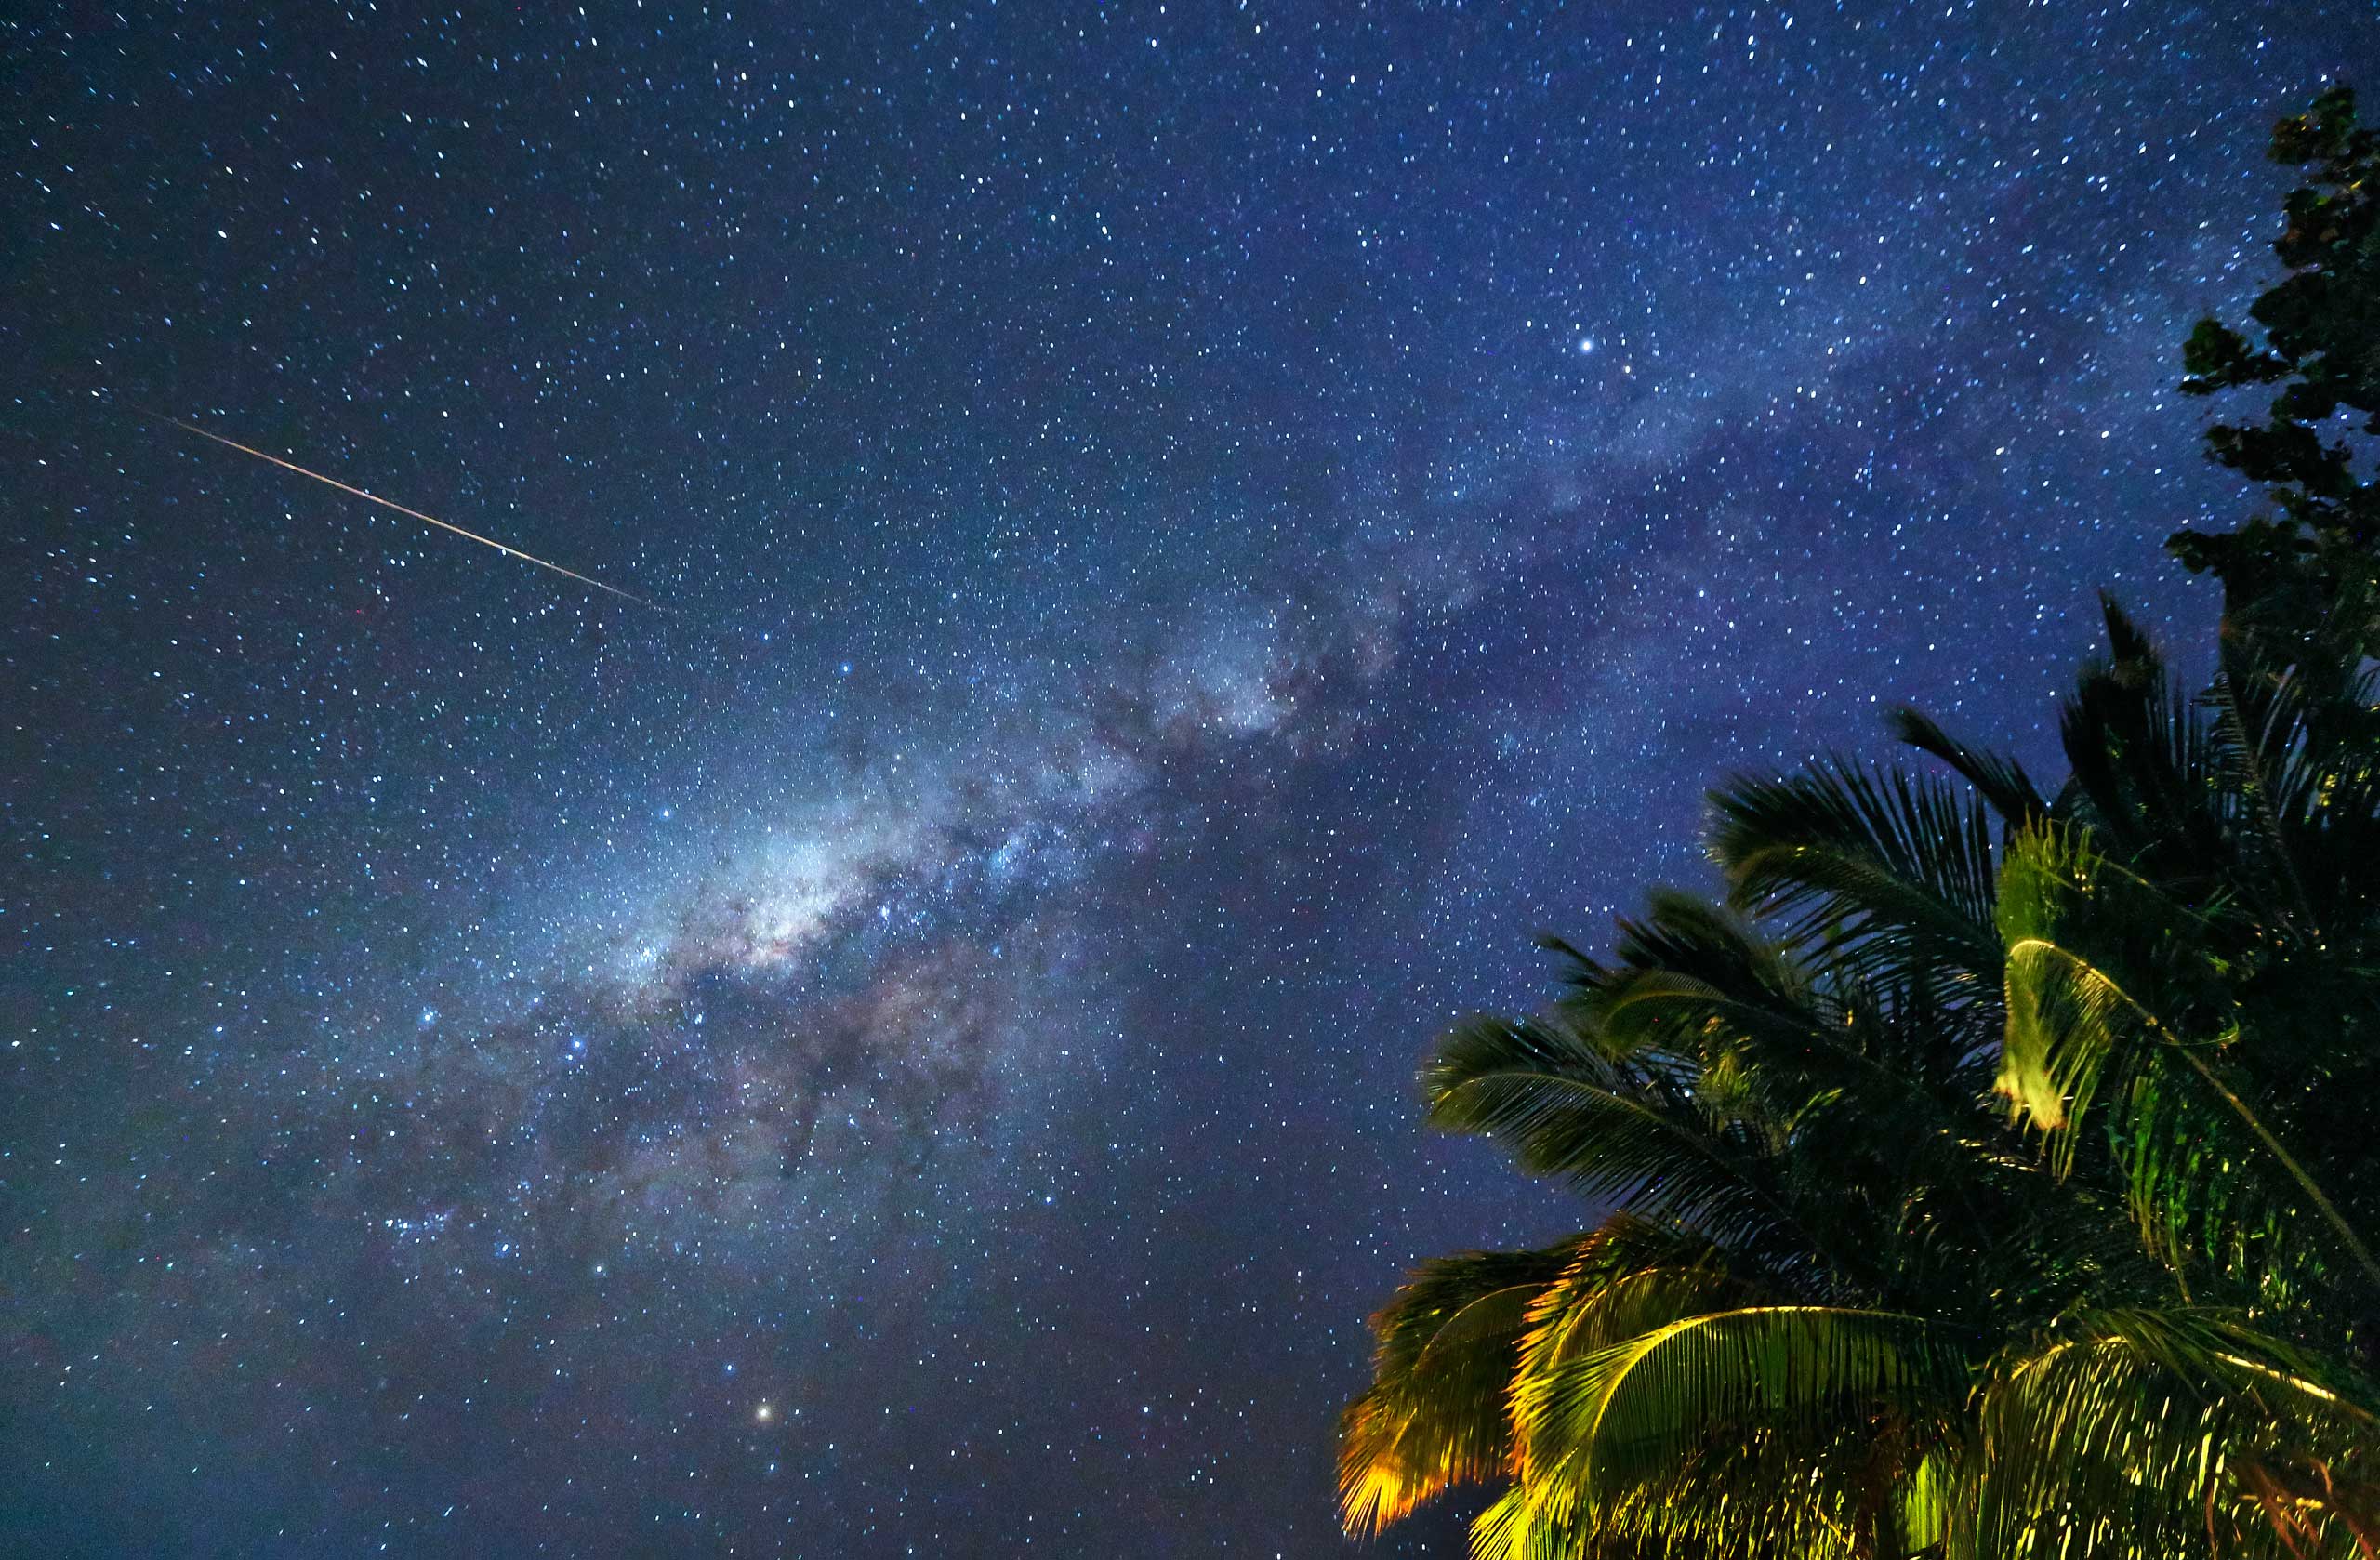 A meteor crosses the Milky Way on the Ari Atoll, Maldives, on the night of Aug. 17, 2014.